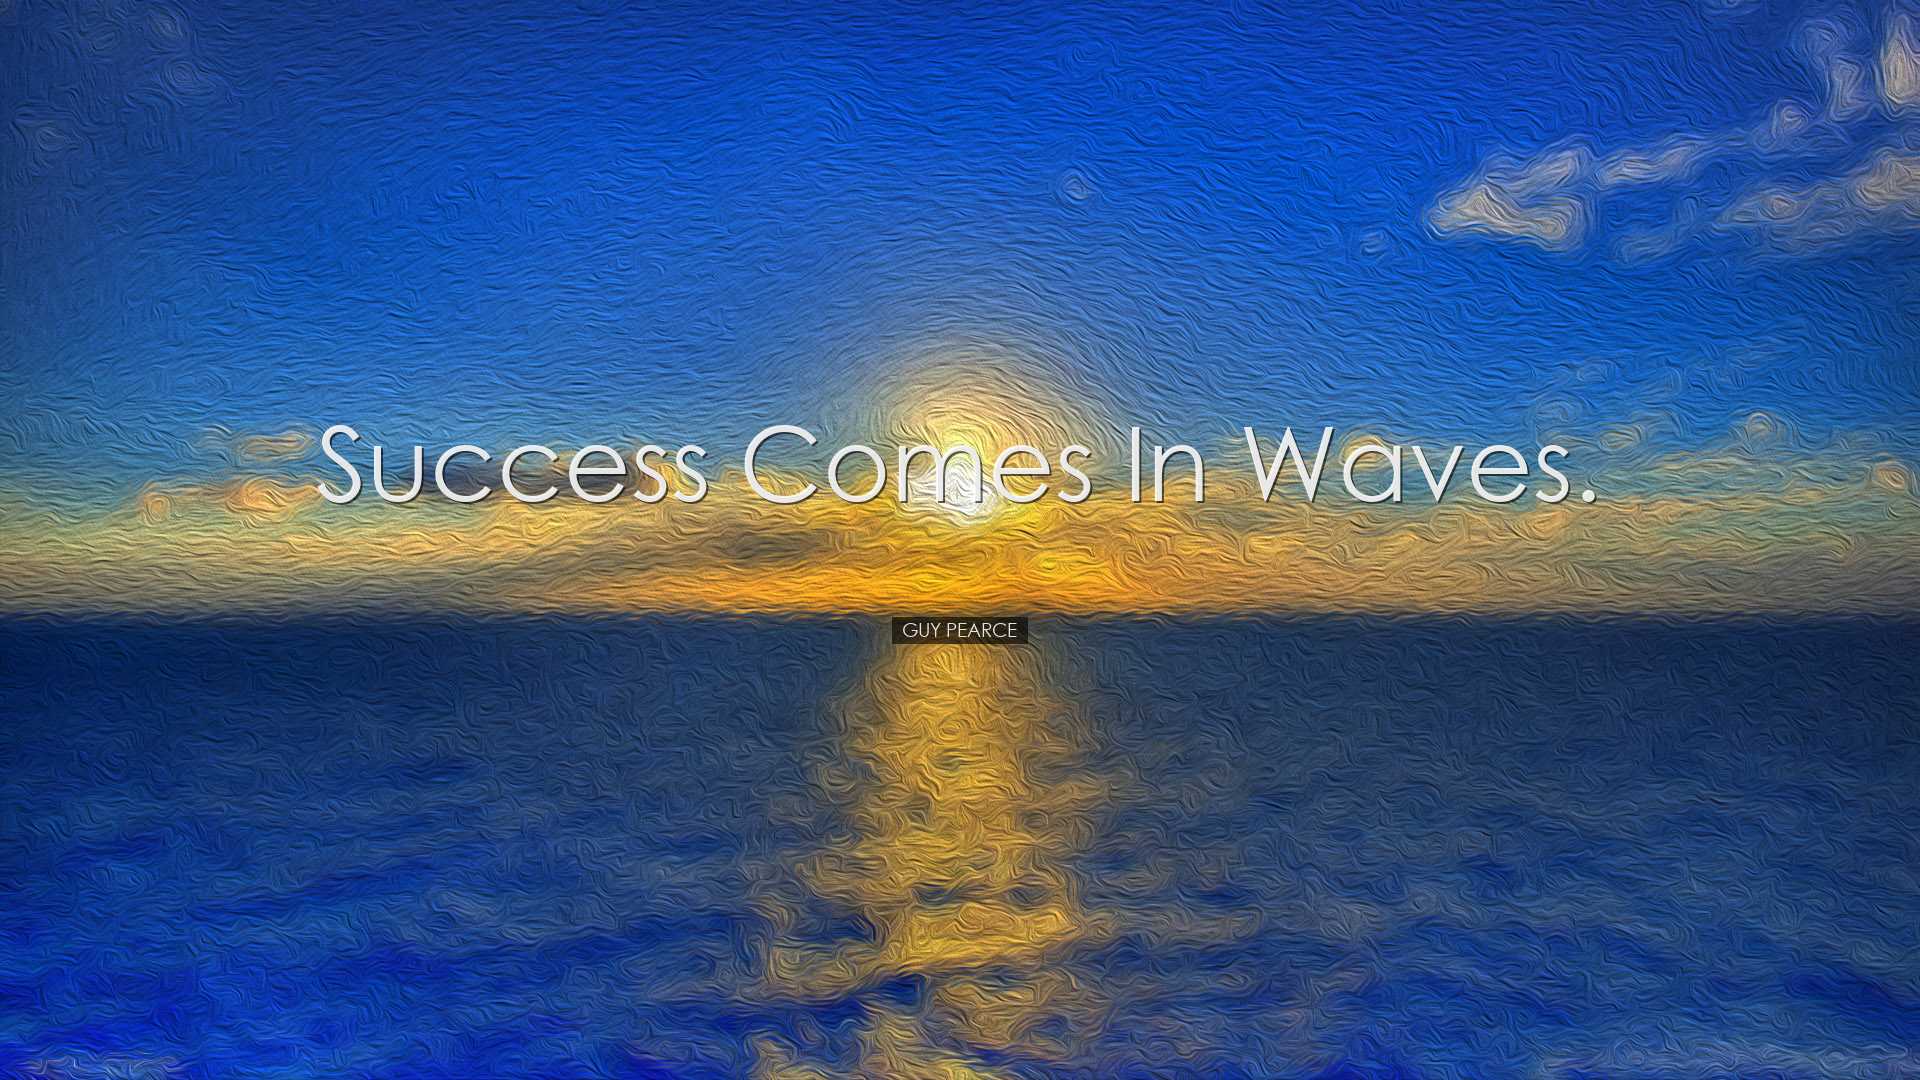 Success comes in waves. - Guy Pearce